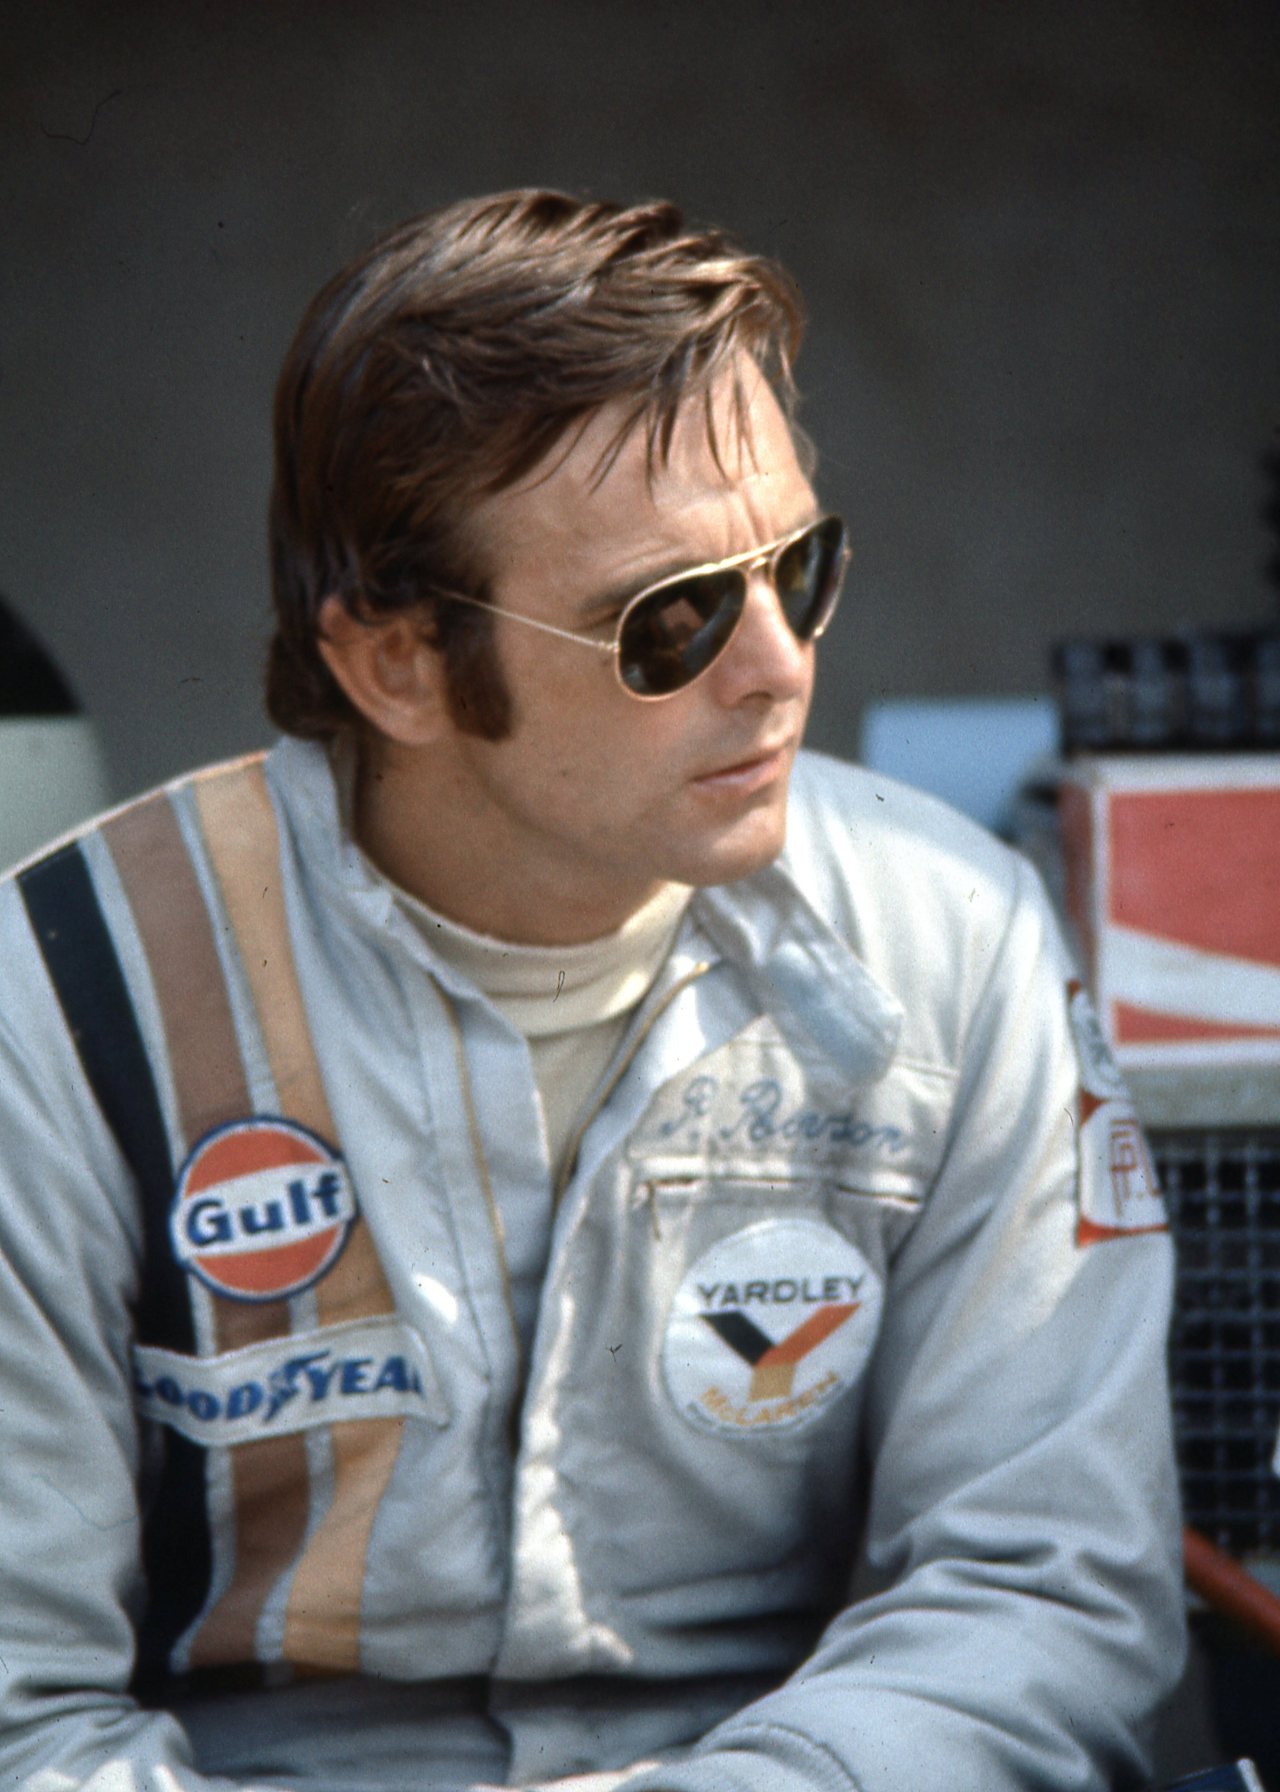 Peter Revson, racing for Yardley at the Osterreichring in 1973